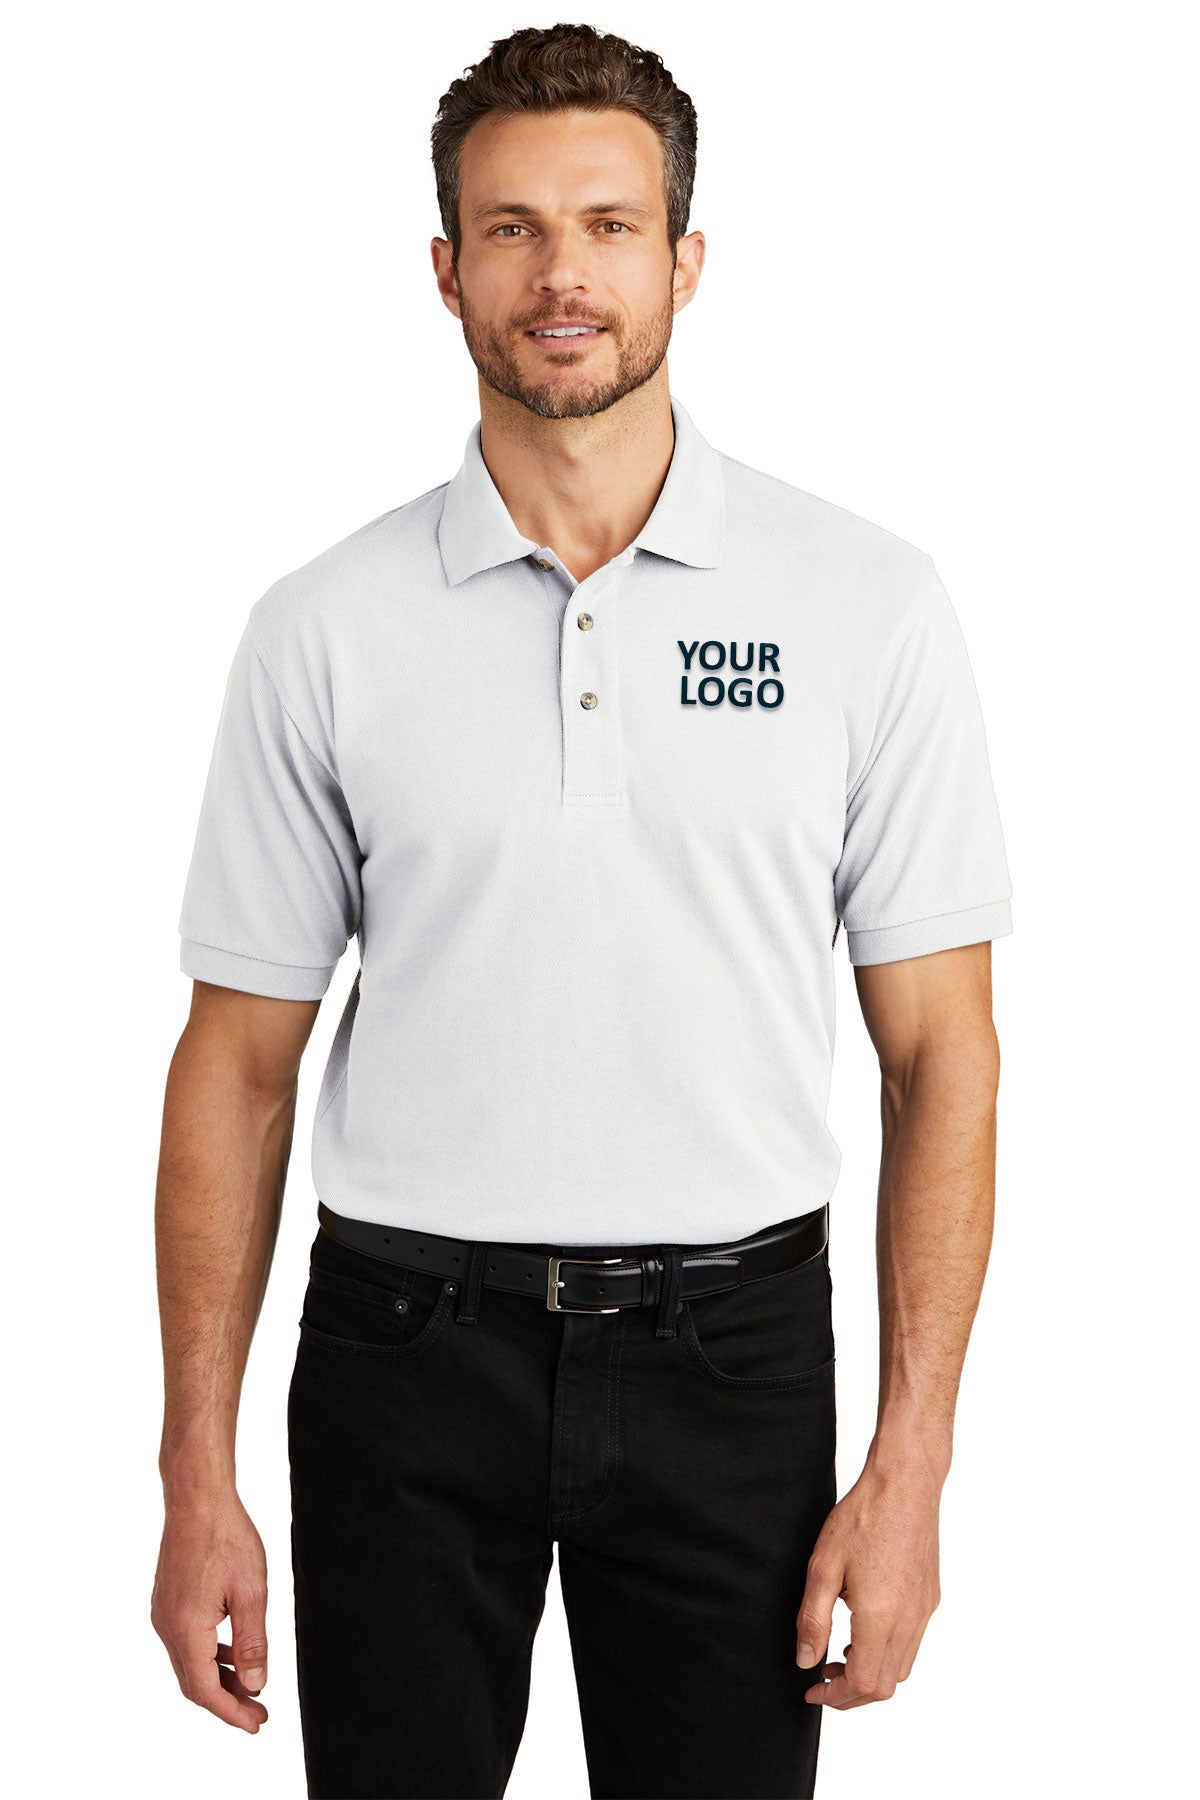 port authority white k420 polo shirts with logo embroidery